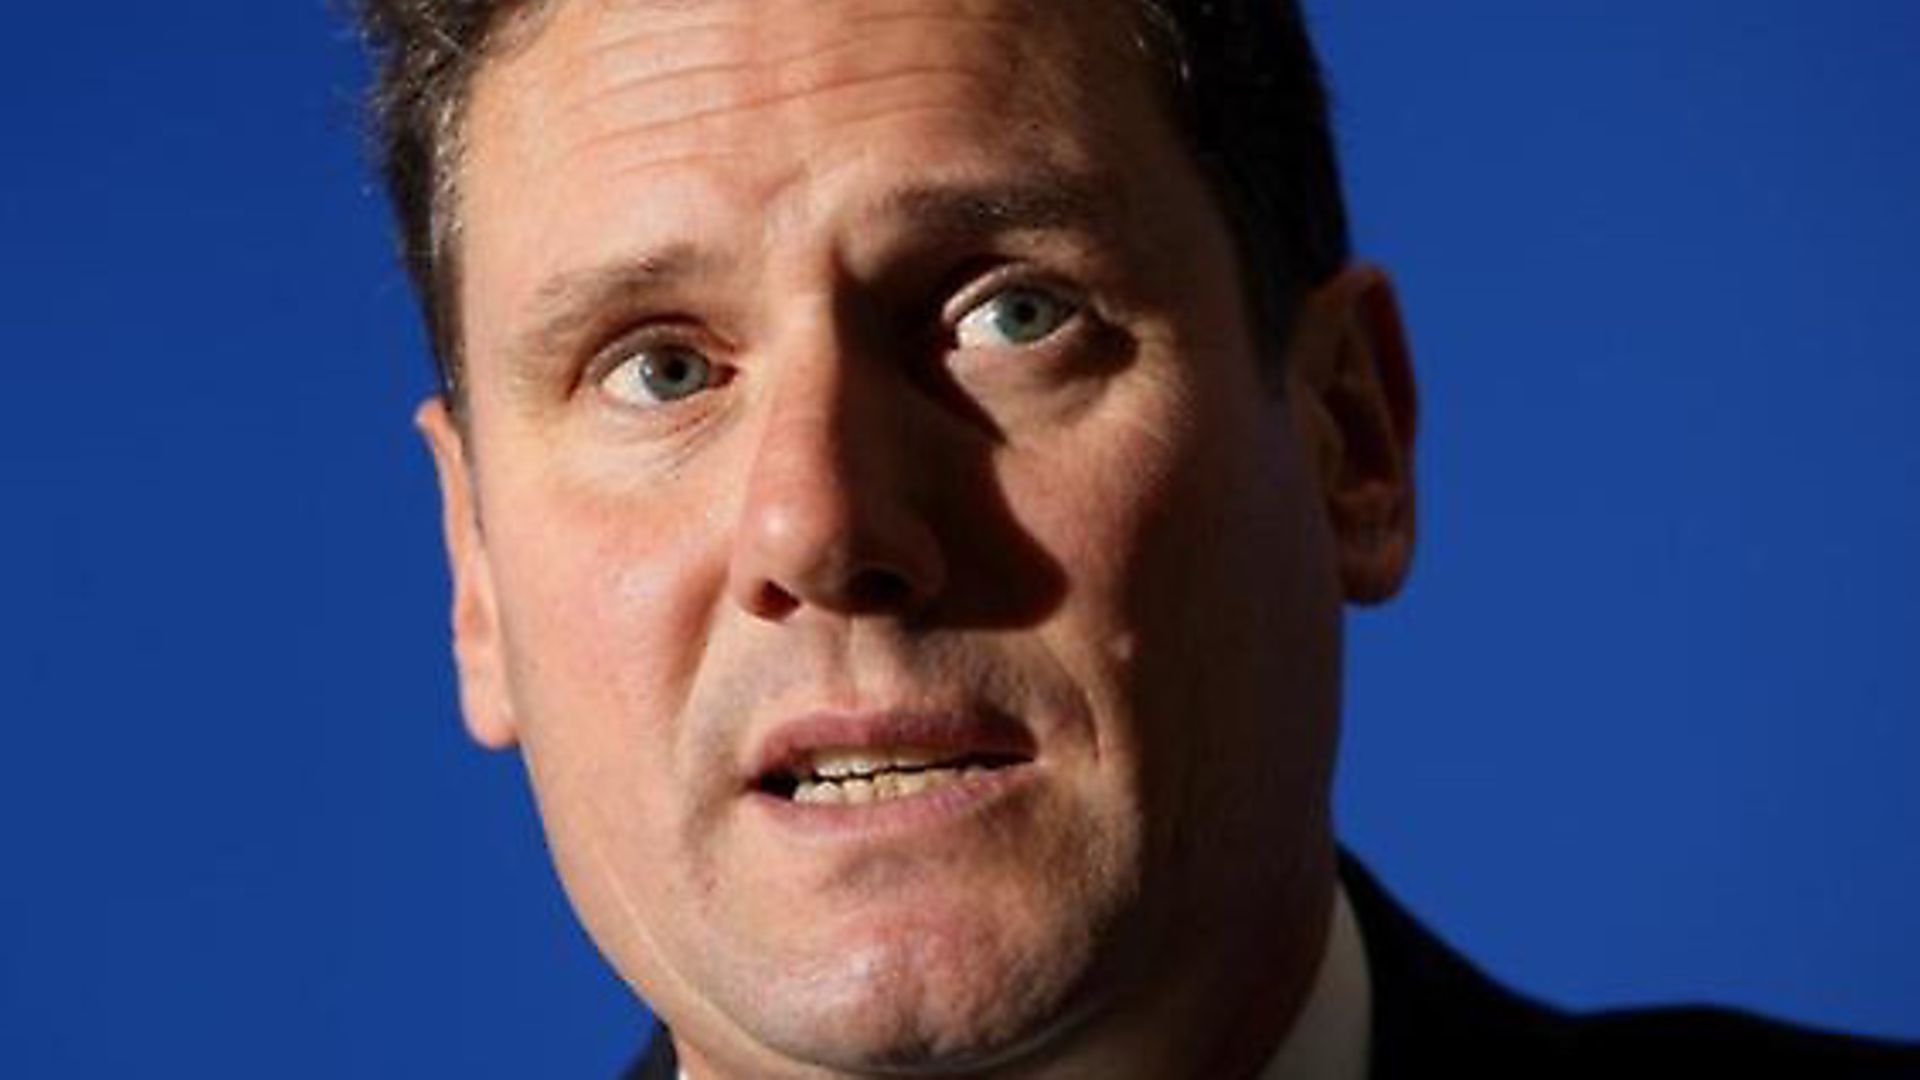 Characterised as a hero of the 48%, Keir Starmer is the countrys most powerful critic of the current Brexit strategy. - Credit: Archant